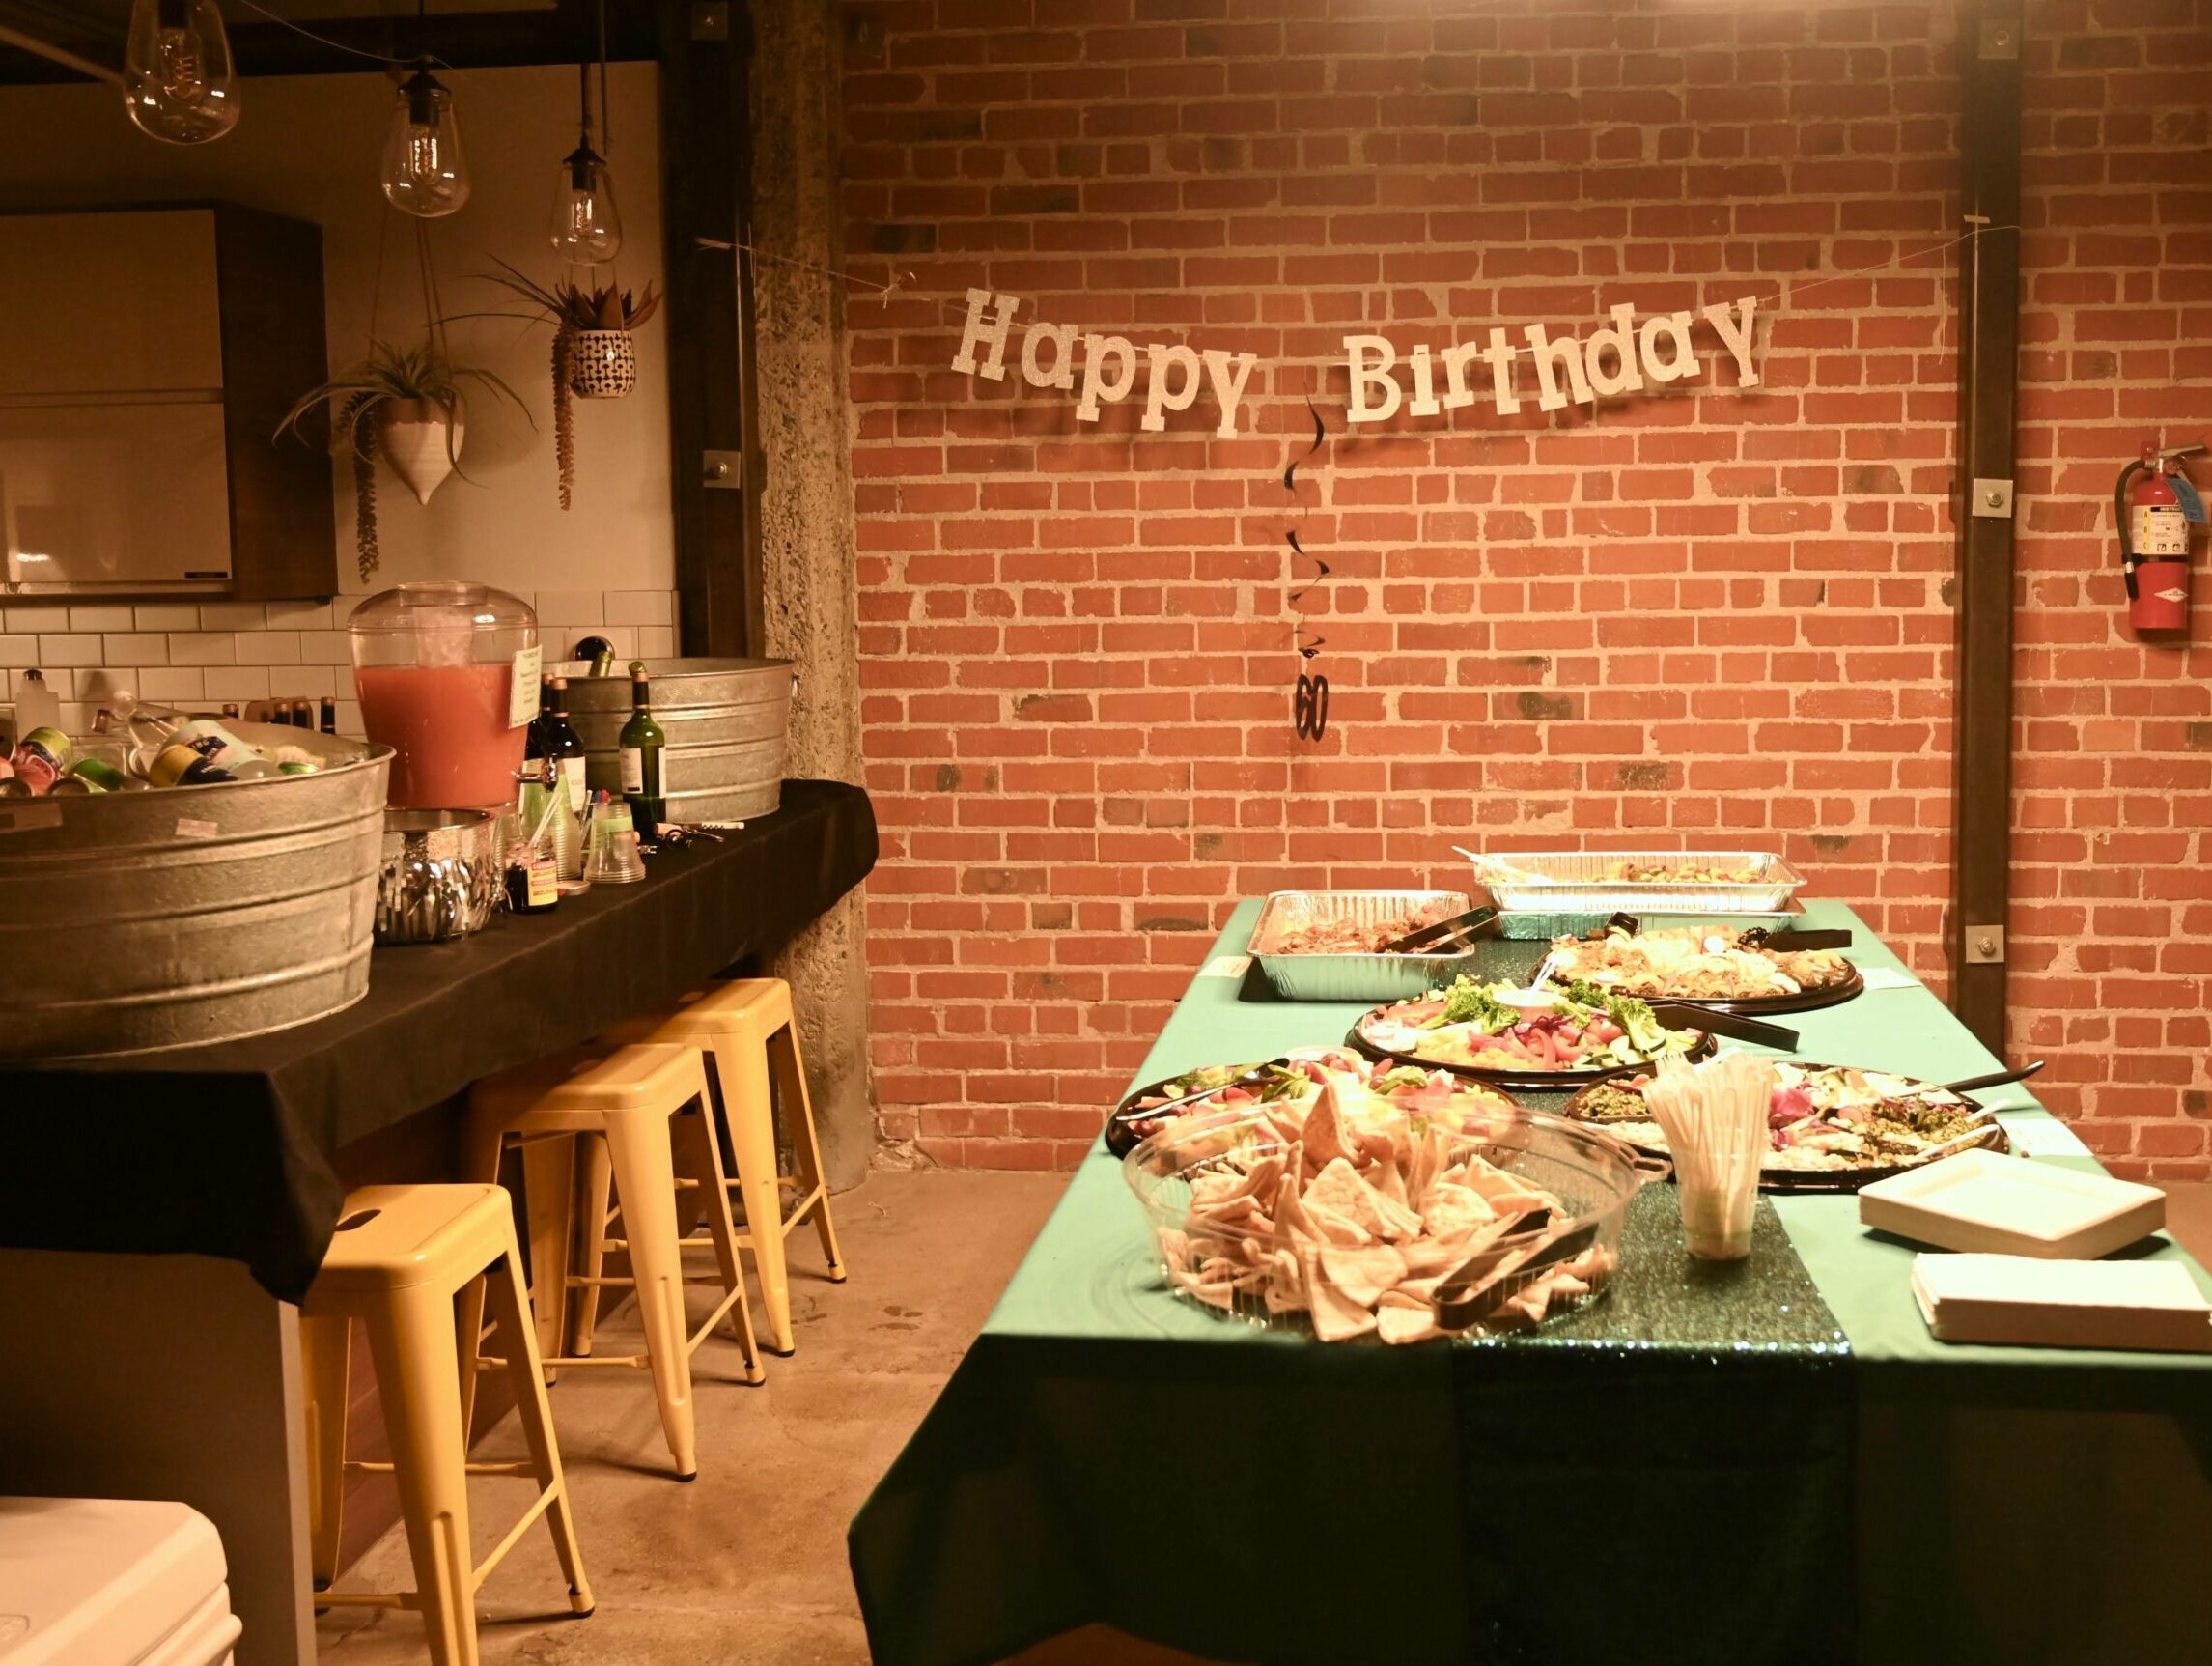 Happy Birthday table and decor. Our event space is highly configurable for celebrations, baby showers, school auctions, receptions, company off-sites and workshops, and for creating community.